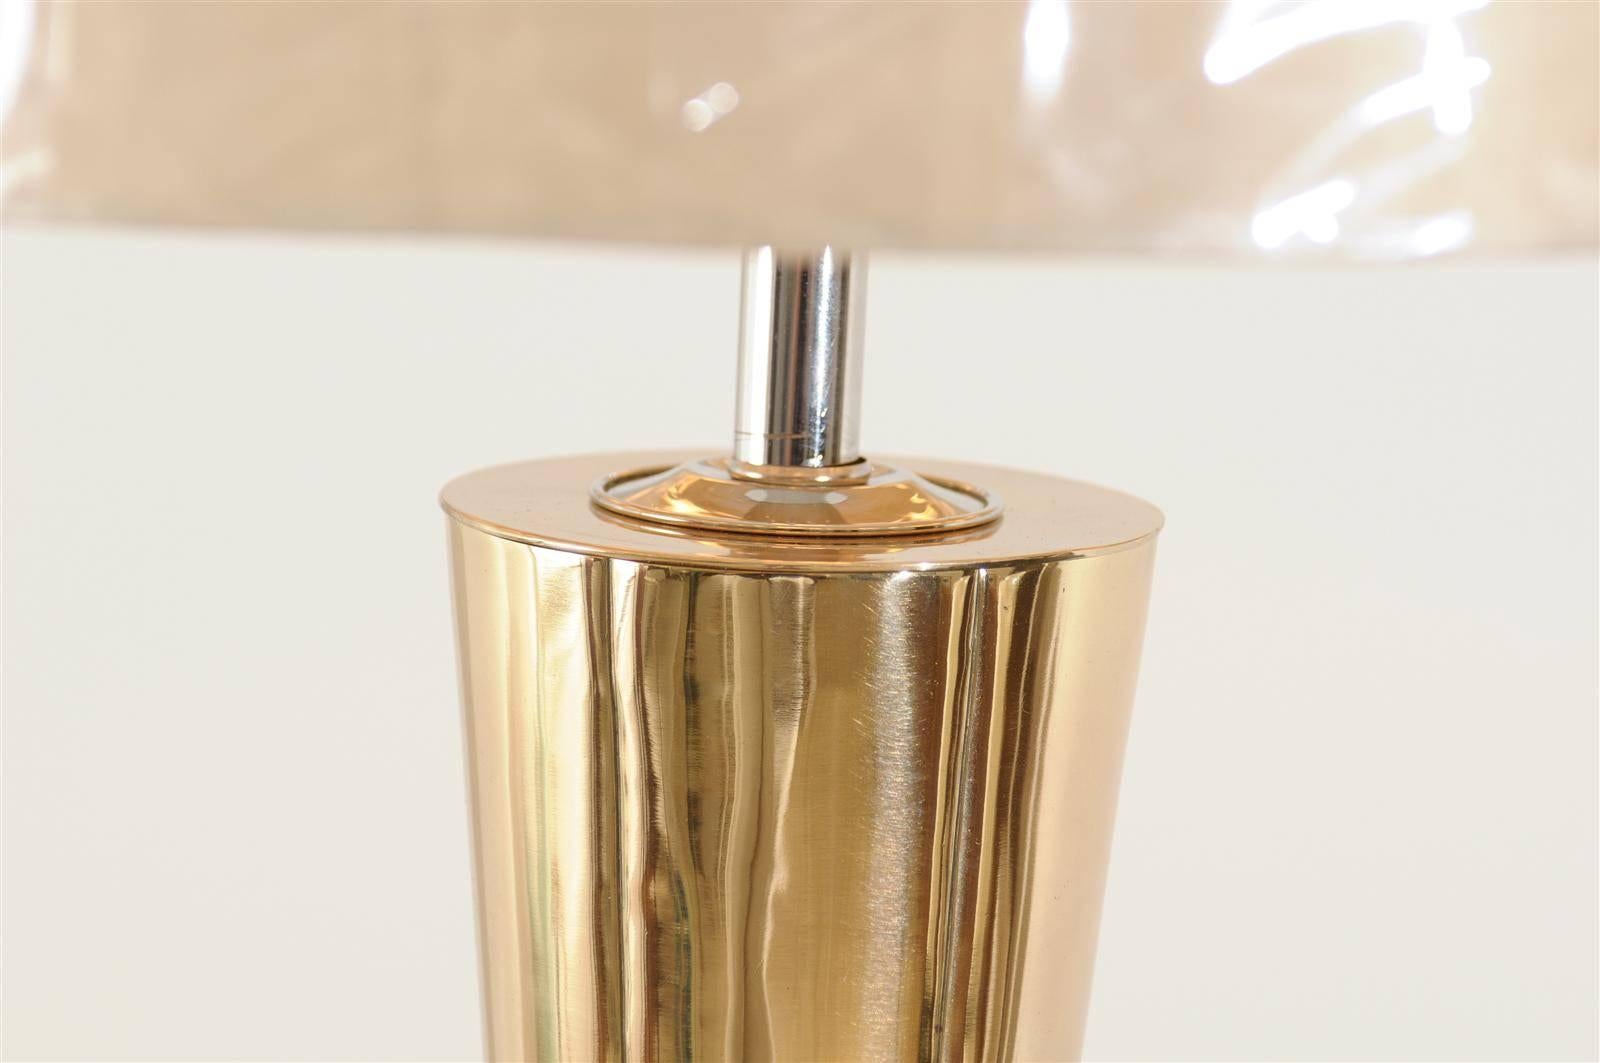 Exquisite Pair of Etched Tornado Lamps in Brass and Nickel For Sale 2